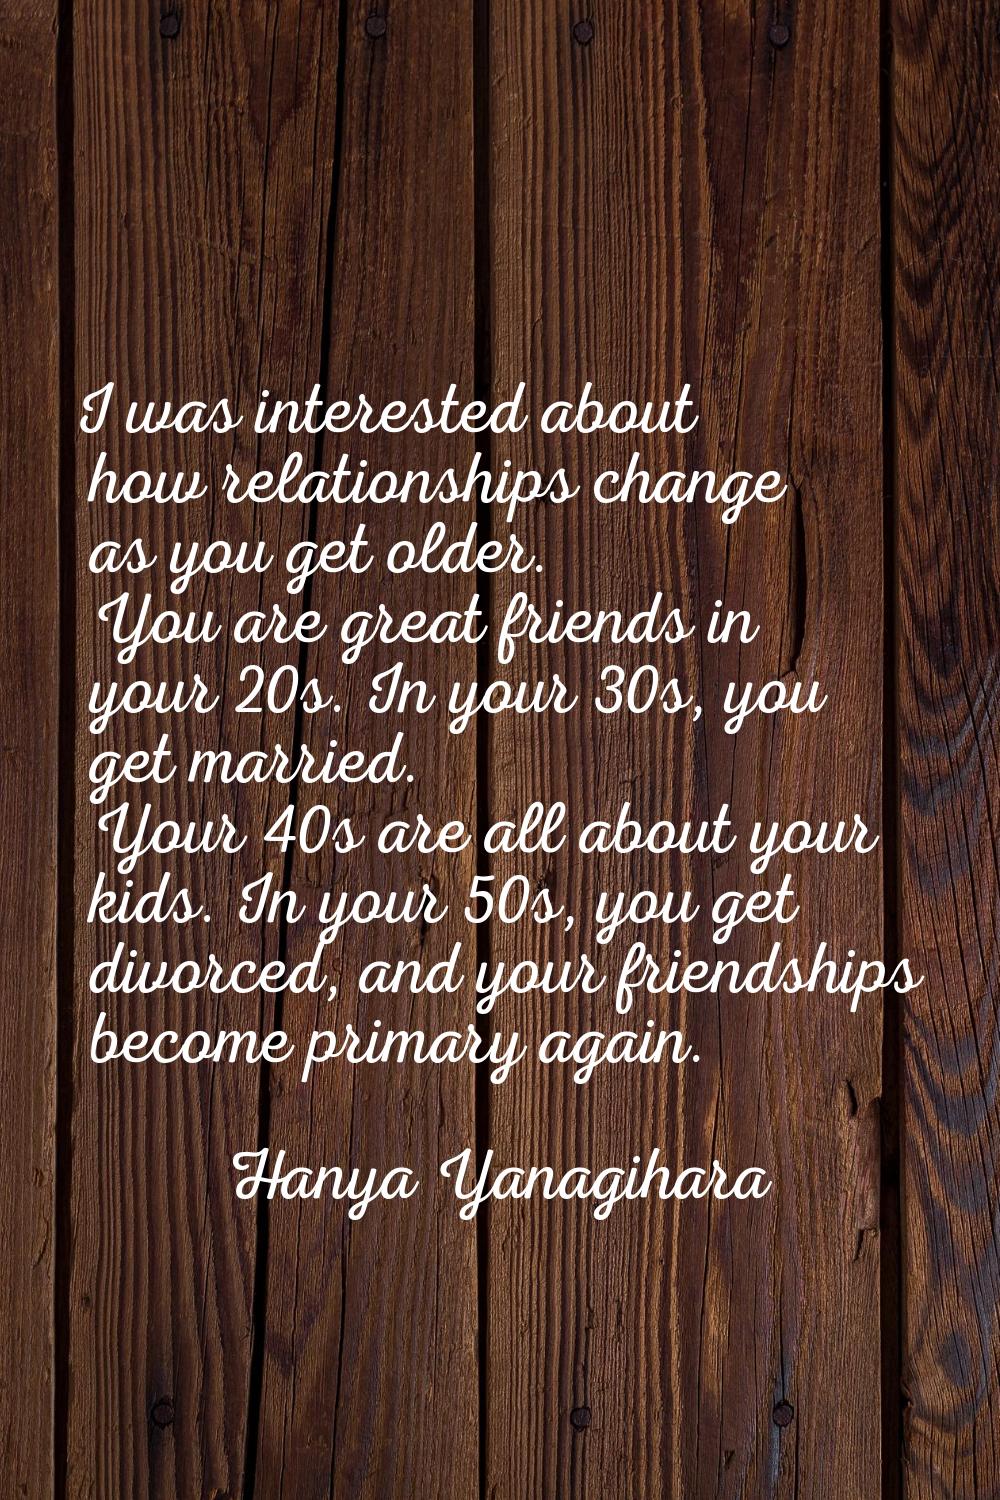 I was interested about how relationships change as you get older. You are great friends in your 20s